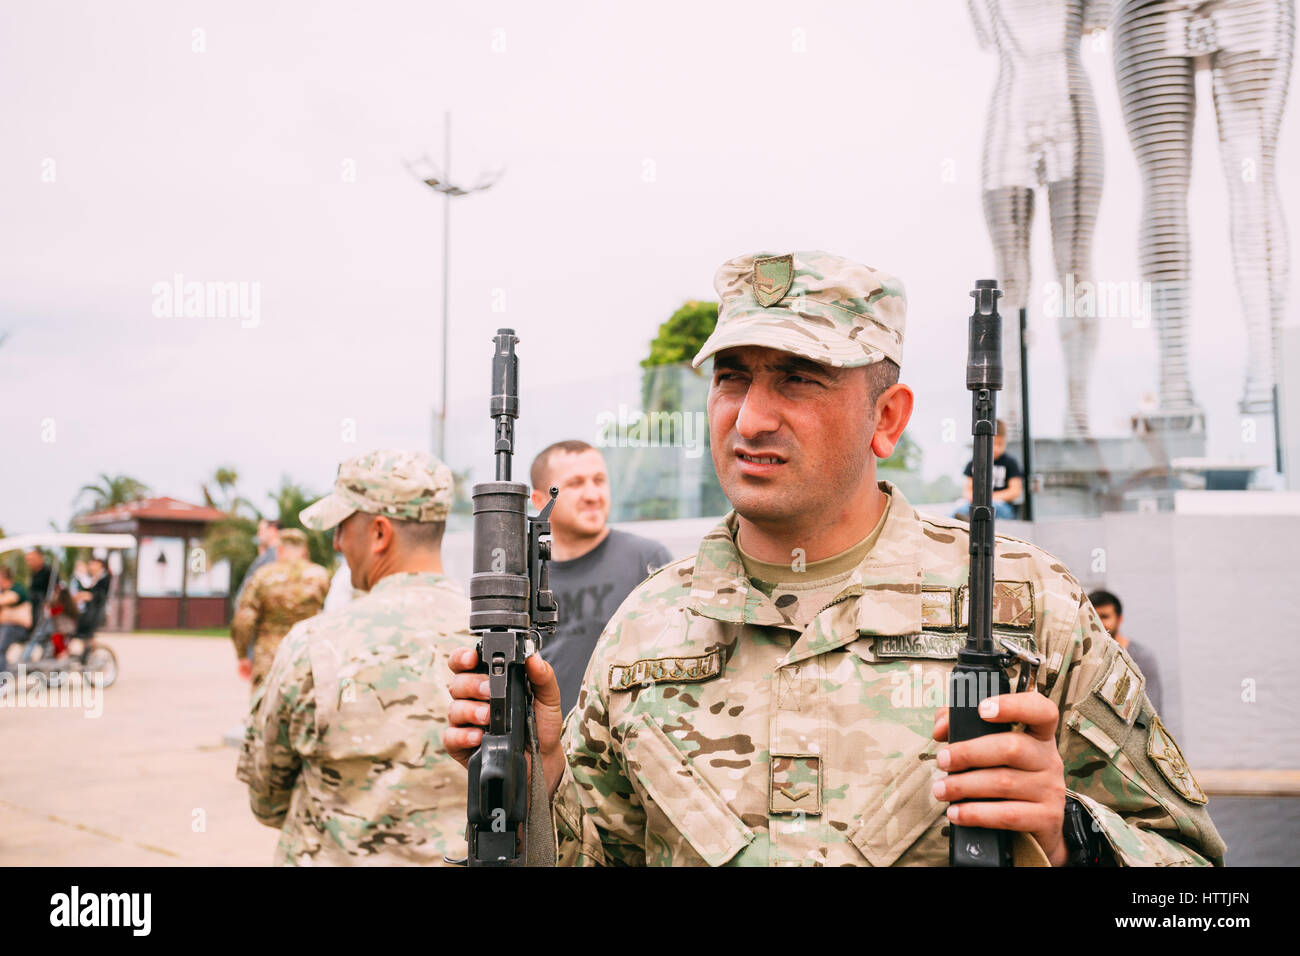 Batumi, Adjara, Georgia - May 26, 2016: Soldier holding M4 assault rifle at an exhibition of weapons during celebration of the national holiday - the  Stock Photo